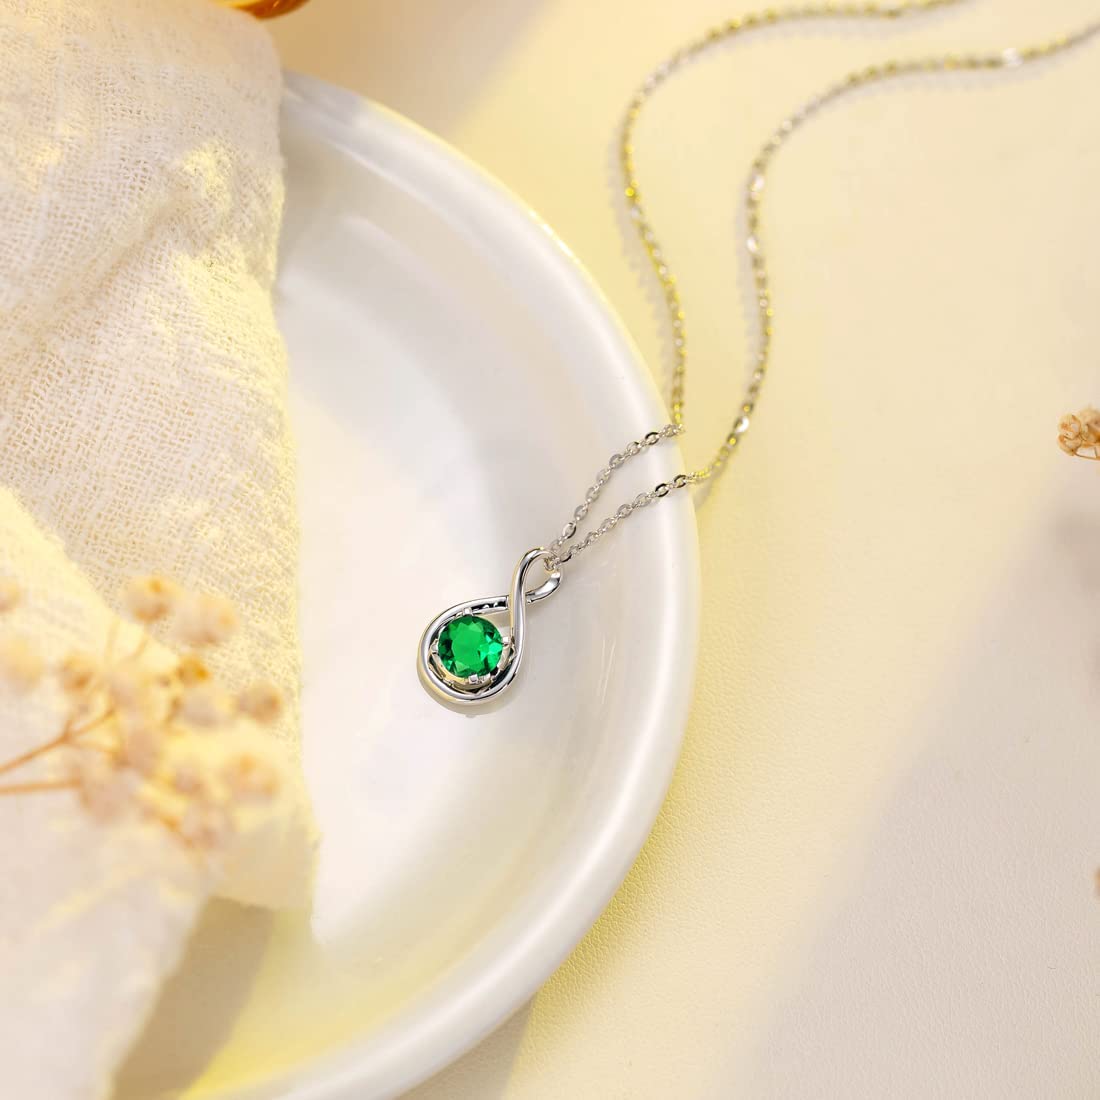 FANCIME "Birthstone" Emerald May Gemstone Sterling Silver Necklace Full